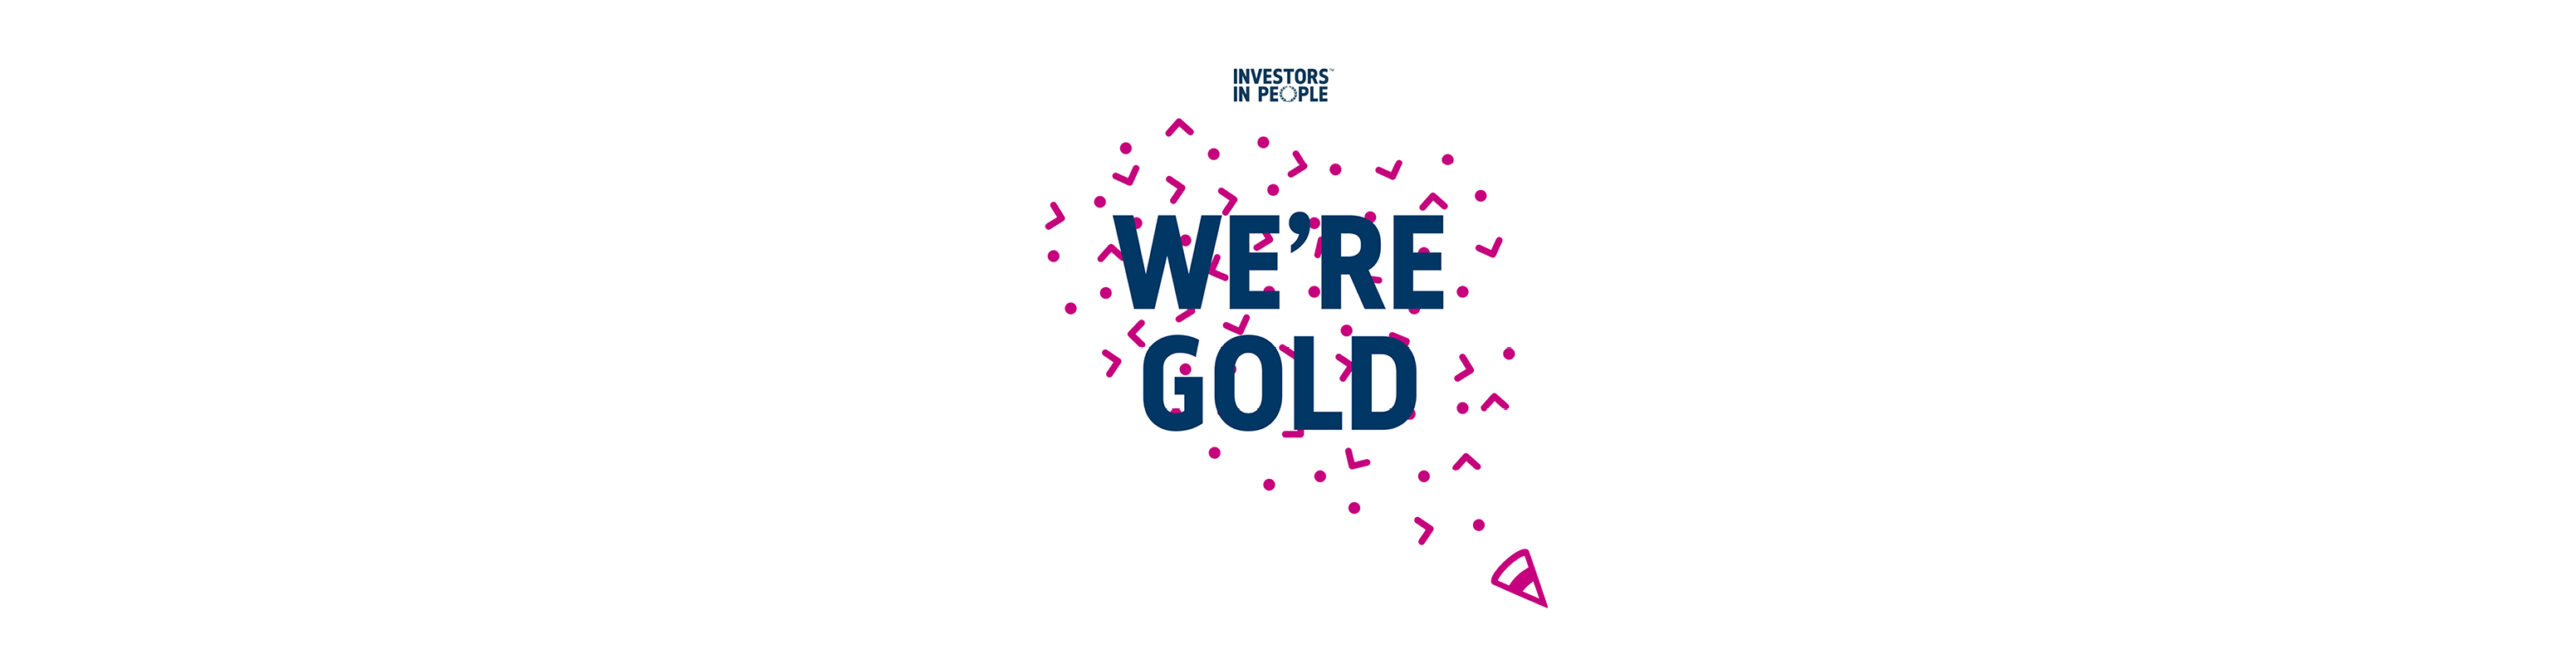 Investors in People: We invest in well-being Gold